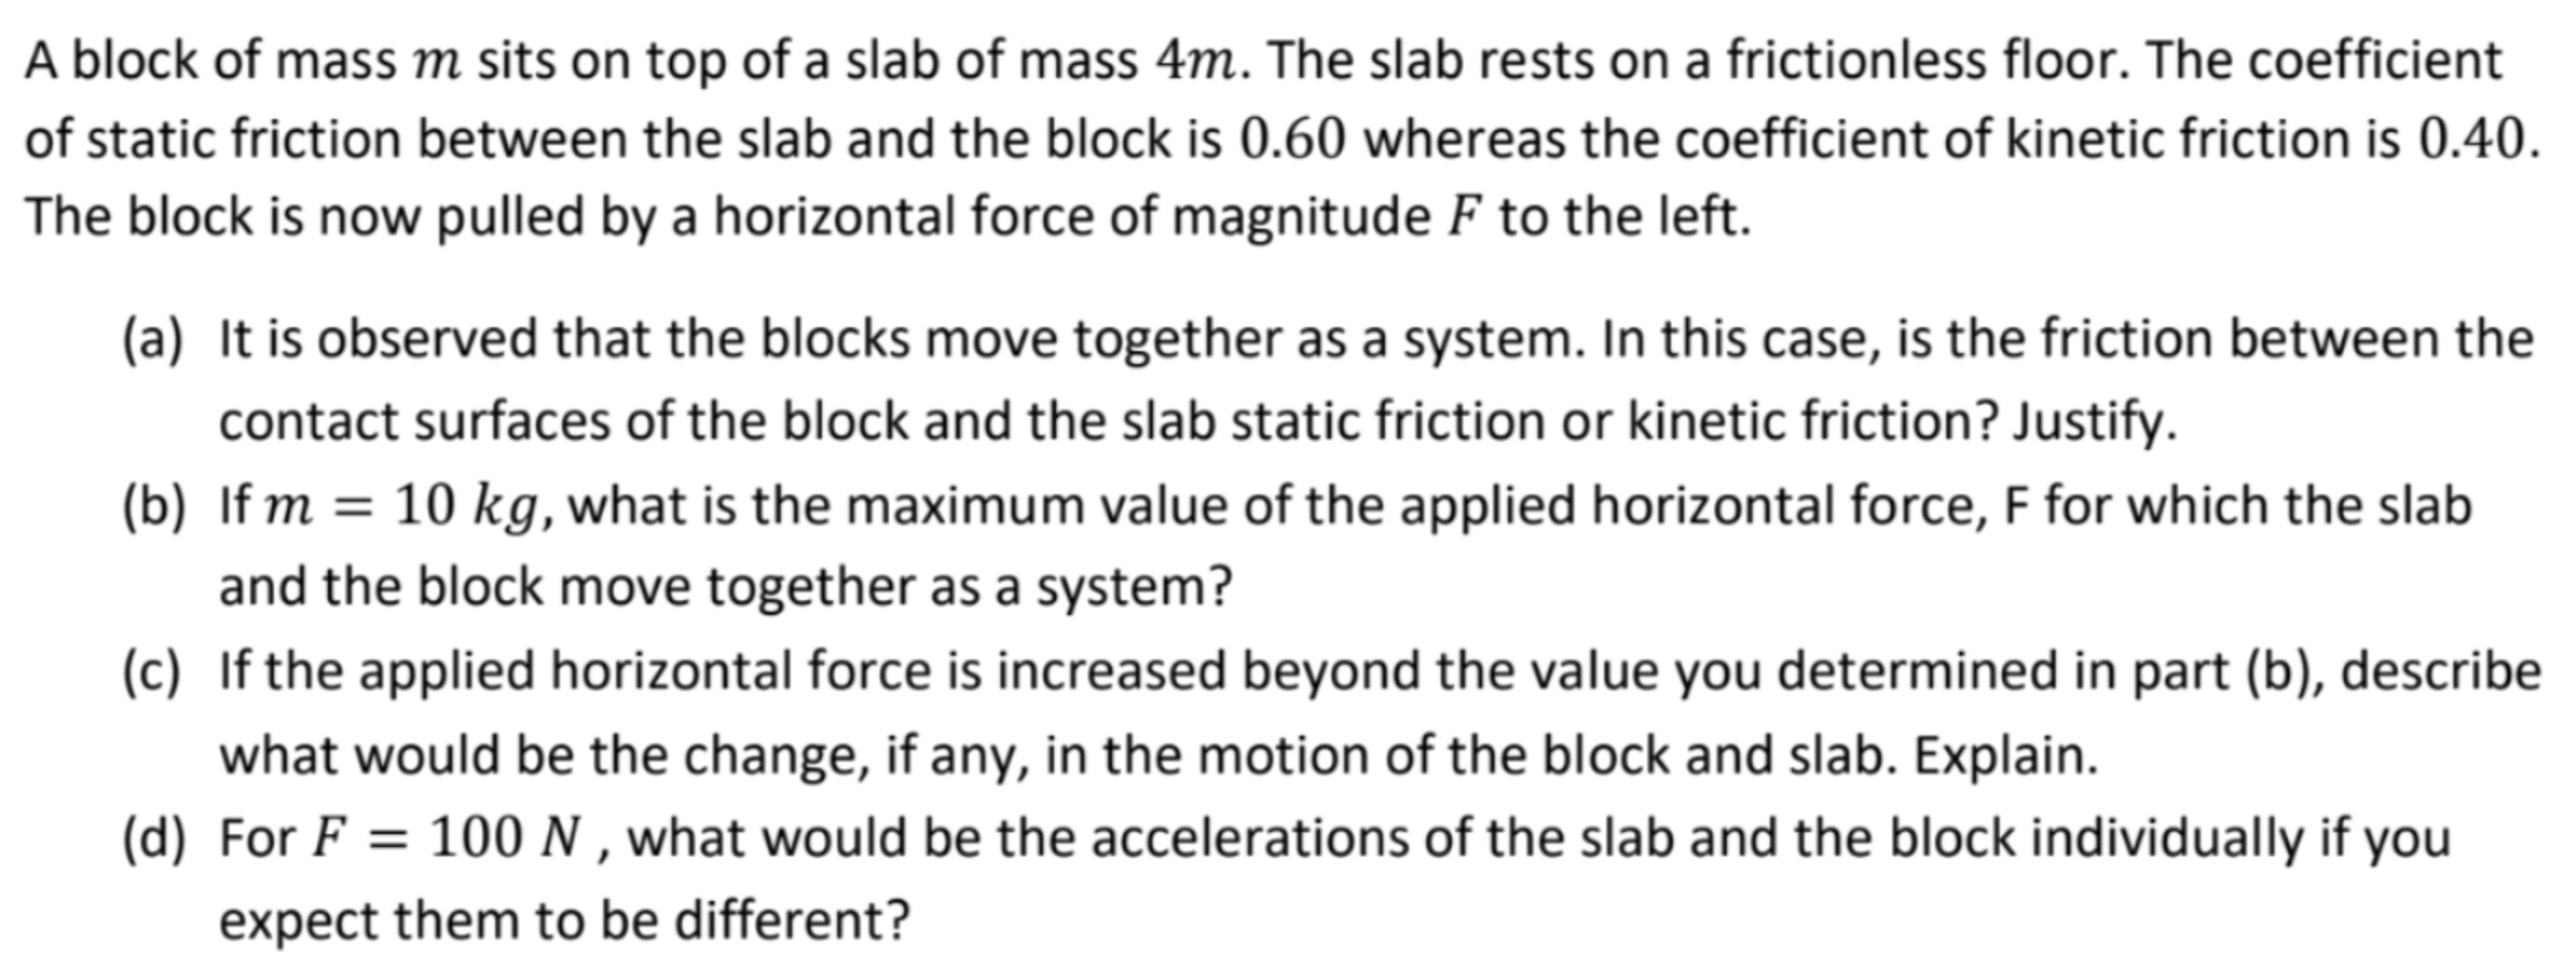 A block of mass m sits on top of a slab of mass 4 m. The slab rests on a frictionless floor. The coefficient of static friction between the slab and the block is 0.60 whereas the coefficient of kinetic friction is 0.40 . The block is now pulled by a horizontal force of magnitude F to the left. (a) It is observed that the blocks move together as a system. In this case, is the friction between the contact surfaces of the block and the slab static friction or kinetic friction? Justify. (b) If m = 10 kg, what is the maximum value of the applied horizontal force, F for which the slab and the block move together as a system? (c) If the applied horizontal force is increased beyond the value you determined in part (b), describe what would be the change, if any, in the motion of the block and slab. Explain. (d) For F = 100 N, what would be the accelerations of the slab and the block individually if you expect them to be different?